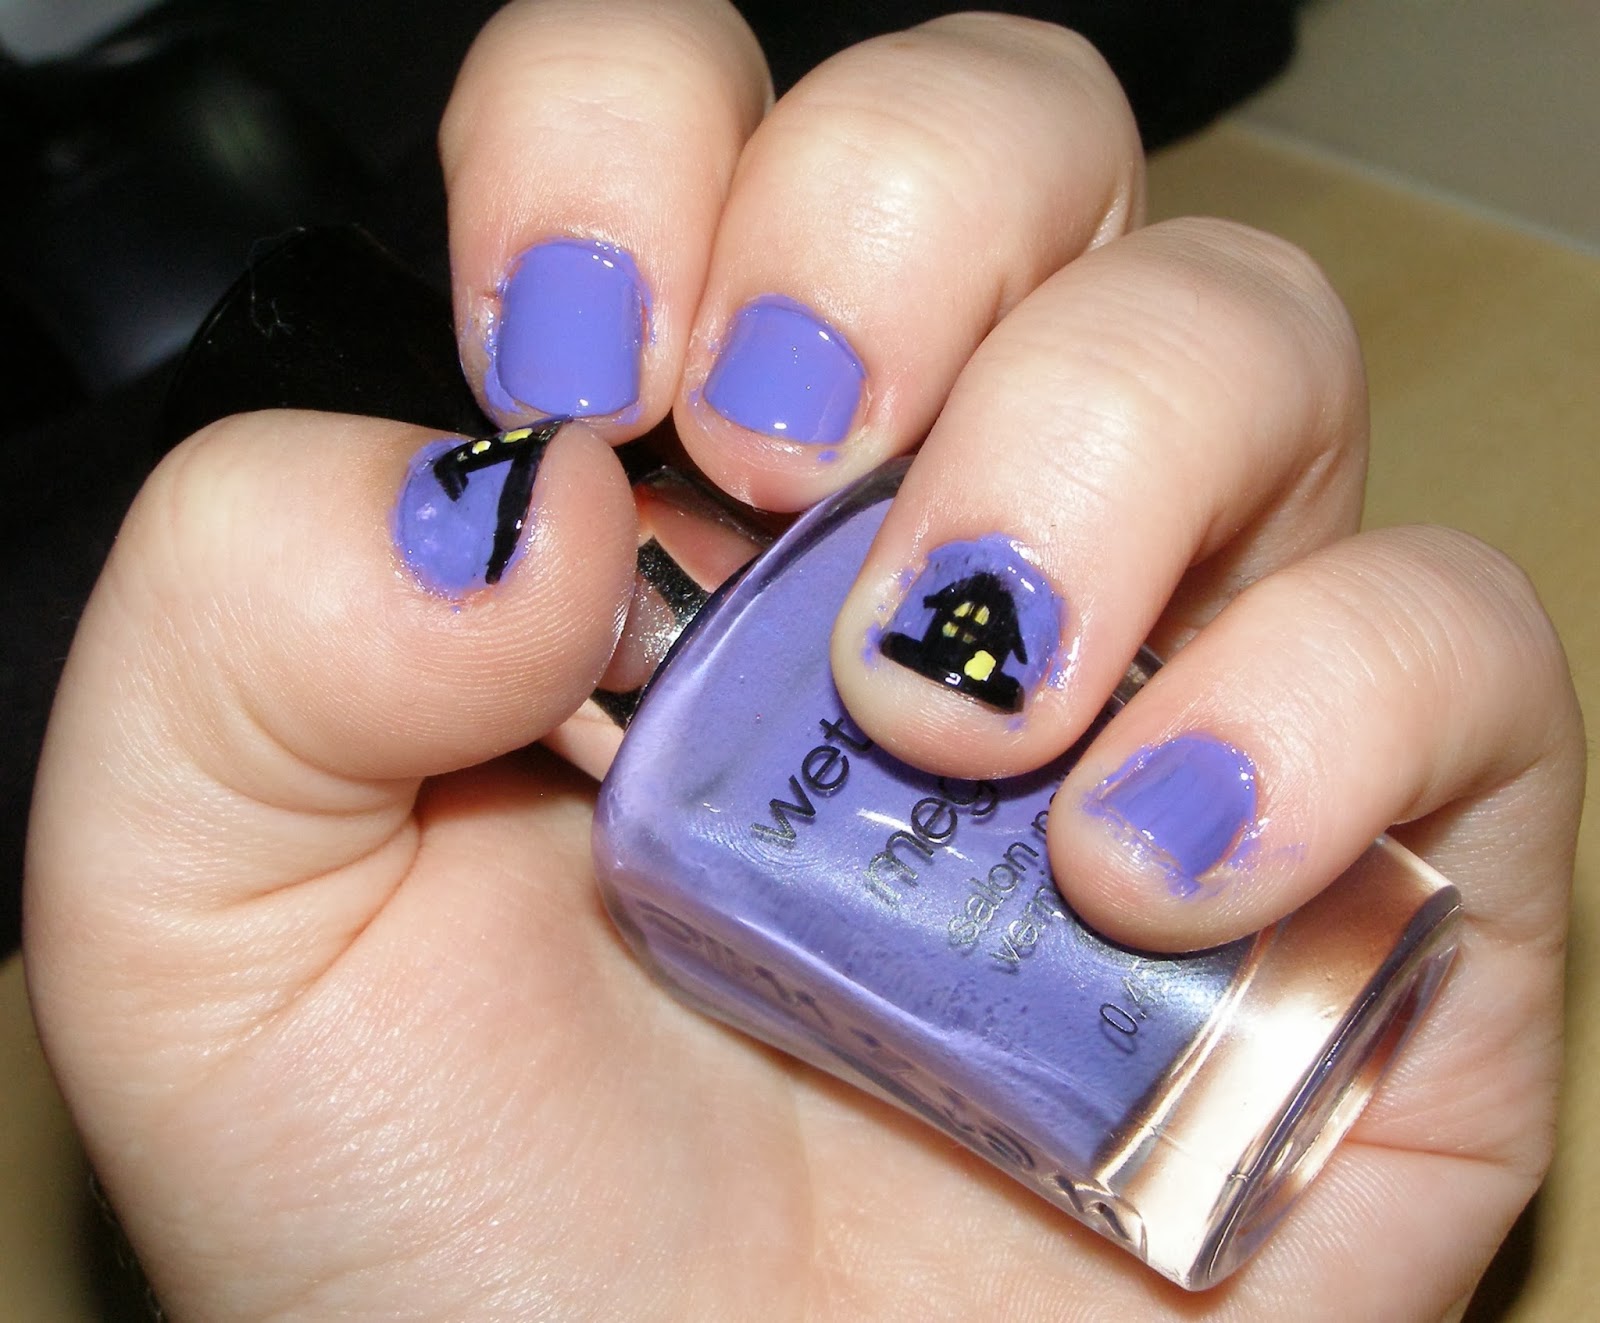 5. Haunted House Nails - wide 6